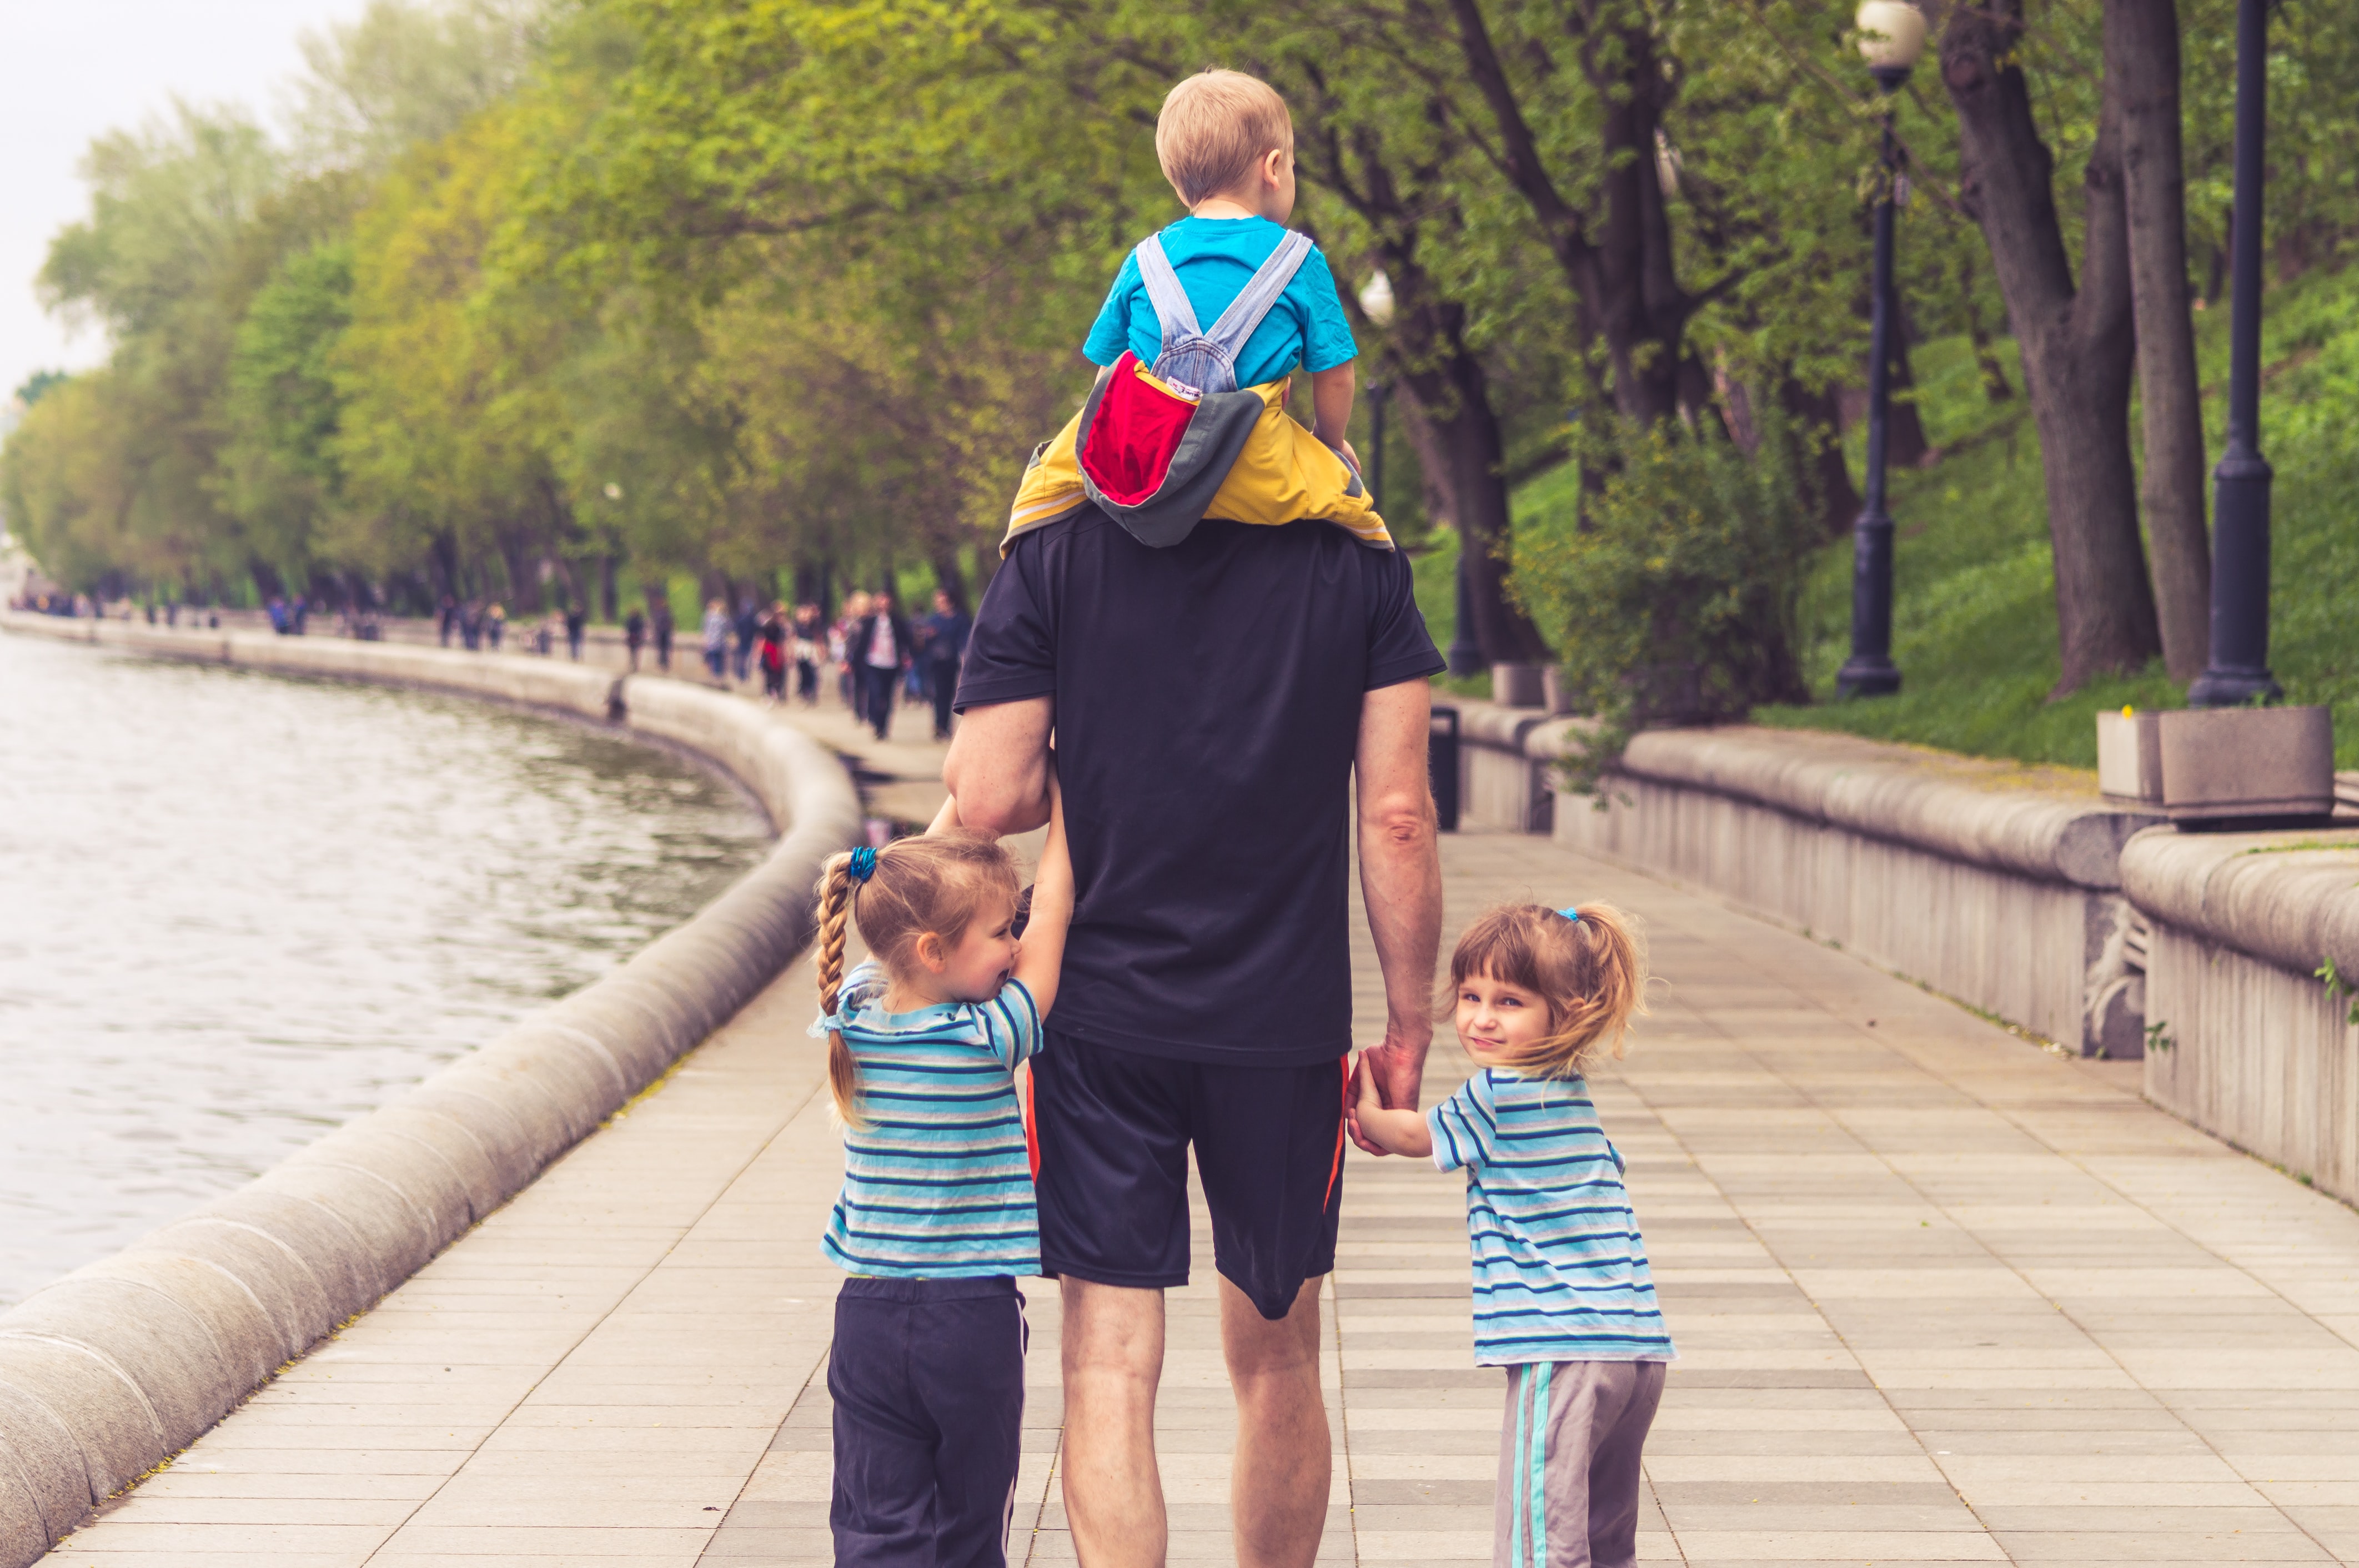 Man walking away from camera holding hands with two little girls and carrying little boy on his shoulders; image by Vitolda Klein, via Unsplash.com.